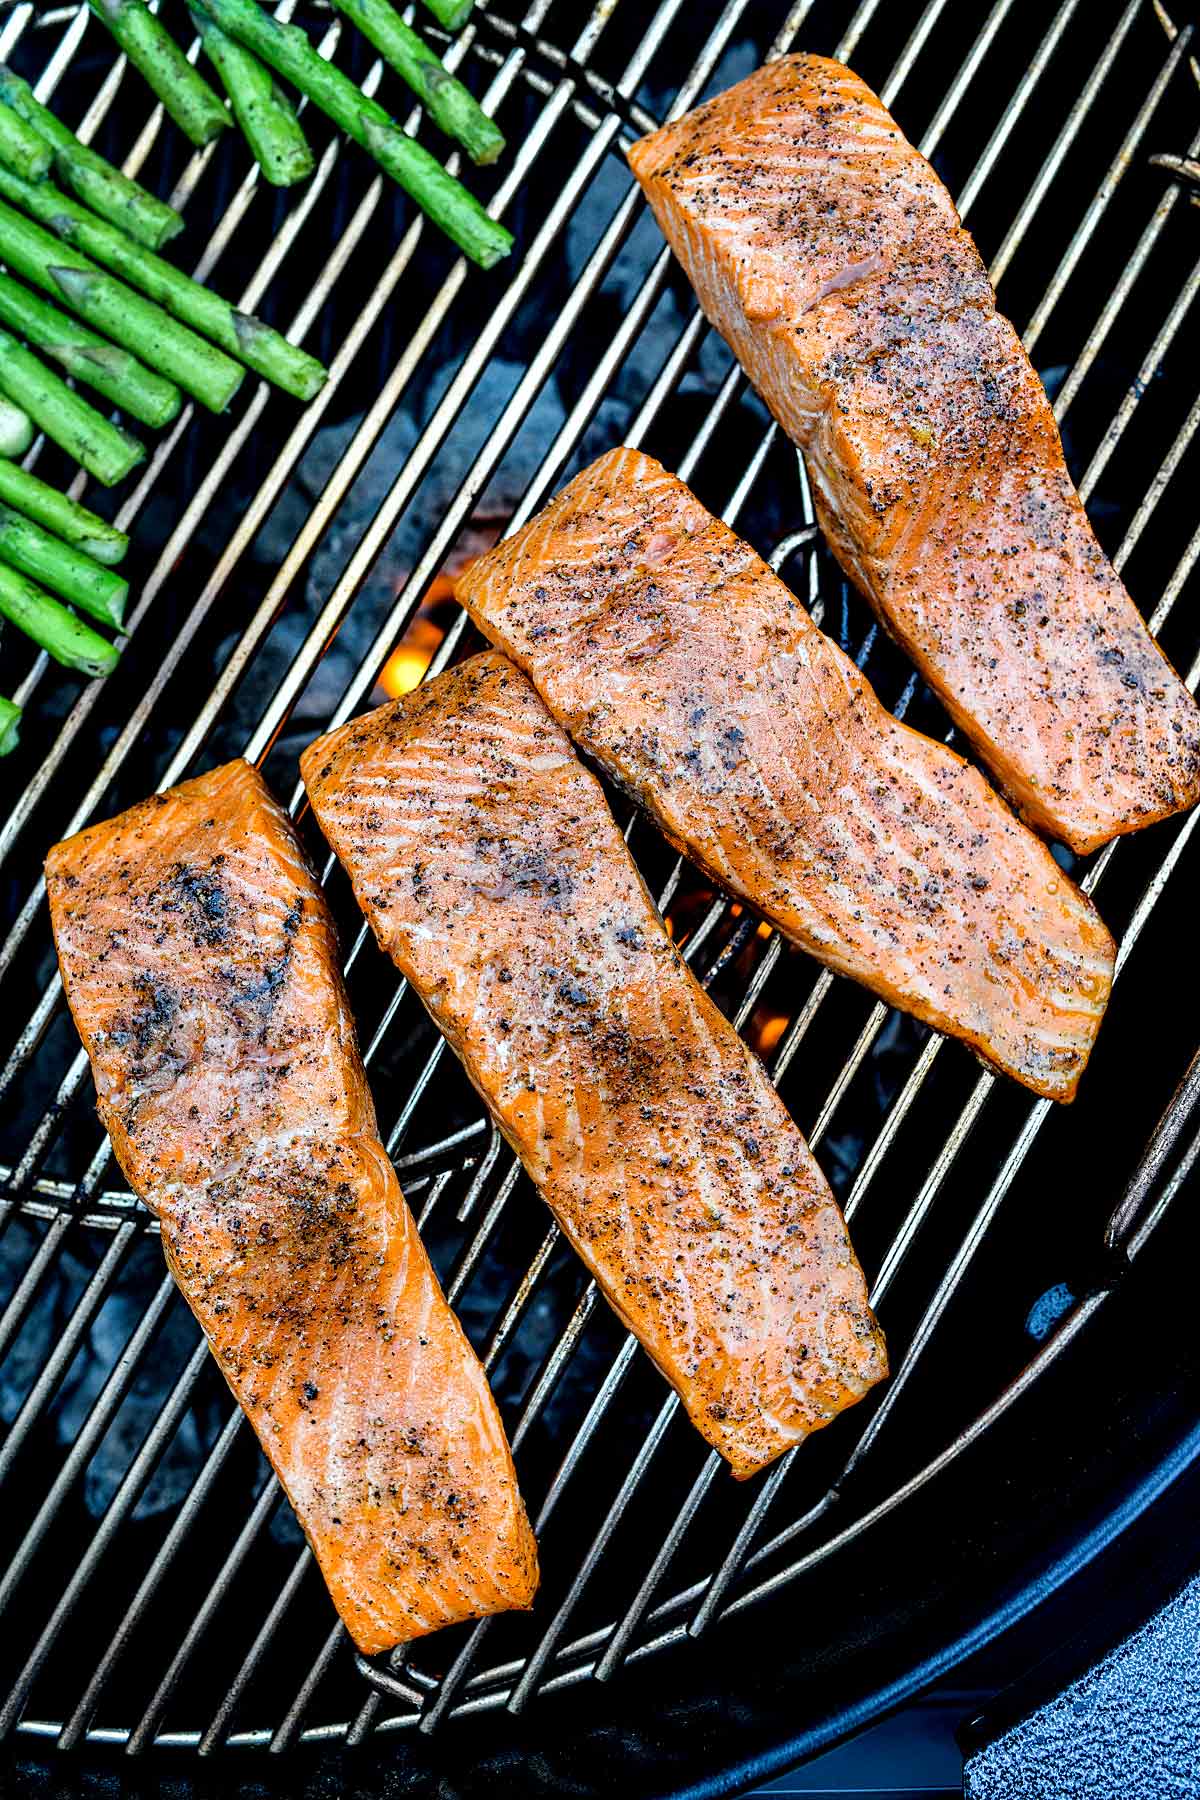 Grilling Recipes Salmon: A Delicious and Healthy Dinner